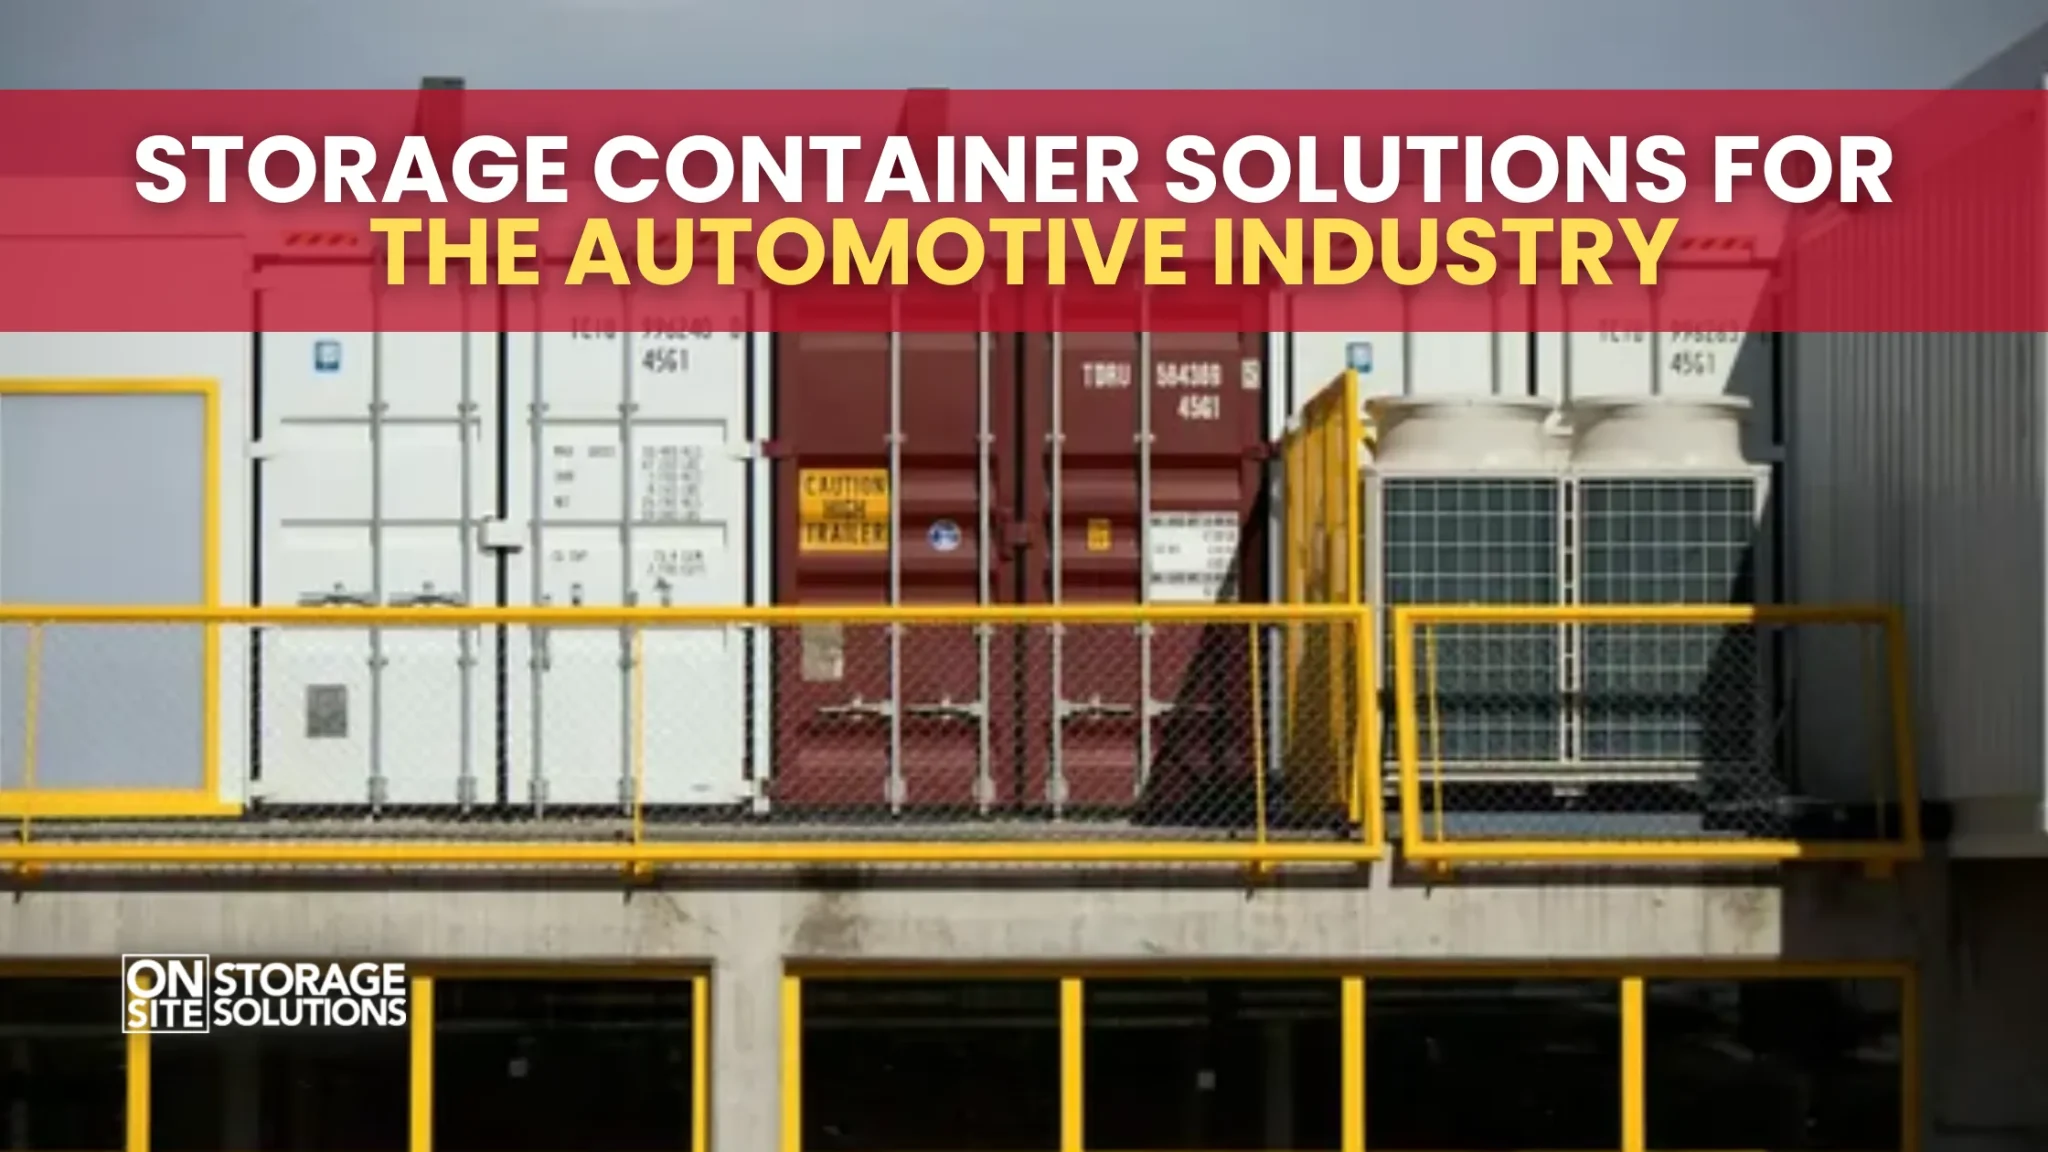 Storage Container Solutions for the Automotive Industry